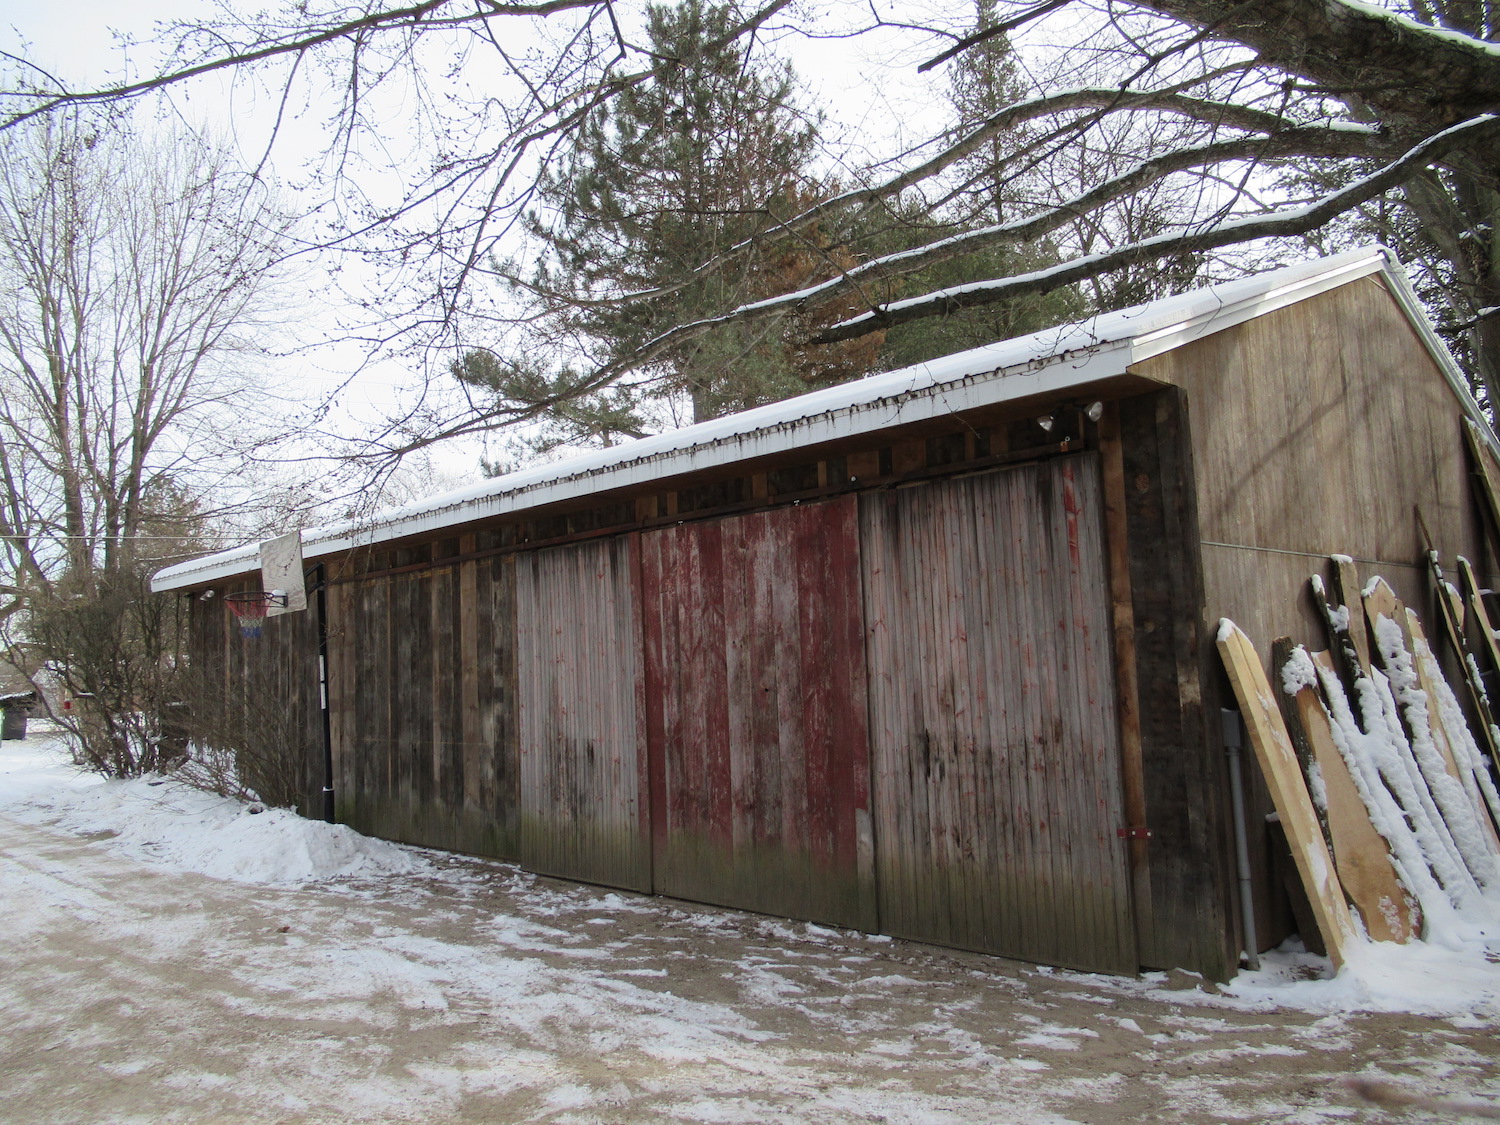 The Michigan Reclaimed Barns and Lumber workshop in the winter